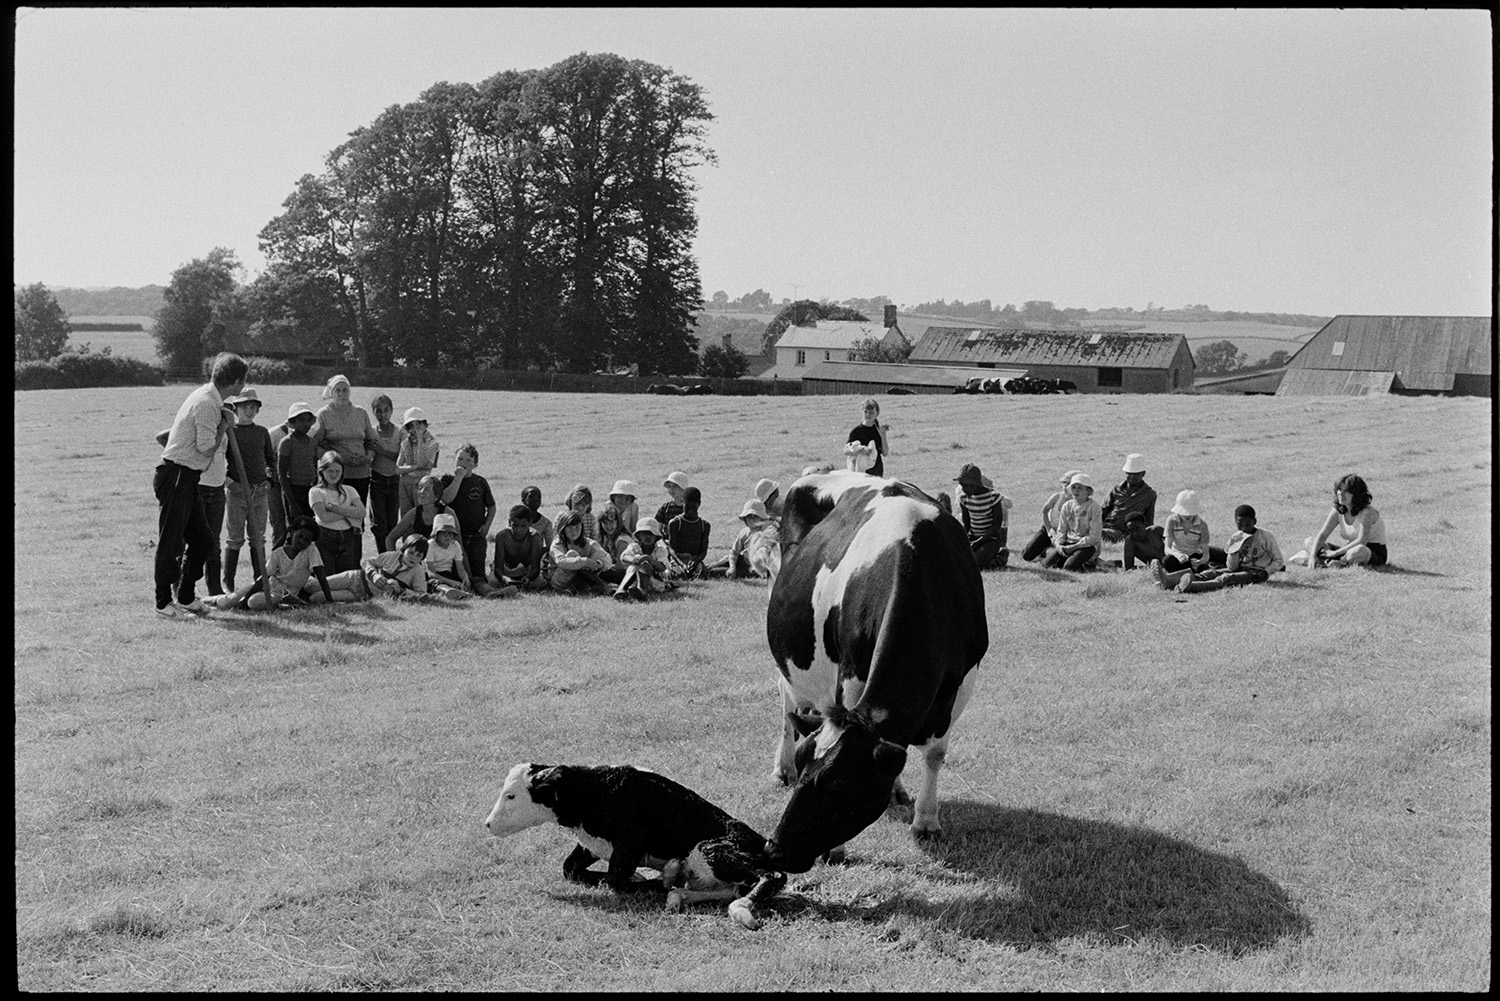 School children watching a cow and new born calf in field.
[A group of children being shown a cow with a new born calf in a field at Parsonage Farm, Iddesleigh as part of the Farms for City Children project. In the background is the farmhouse and farm buildings, next to a group of large trees,]